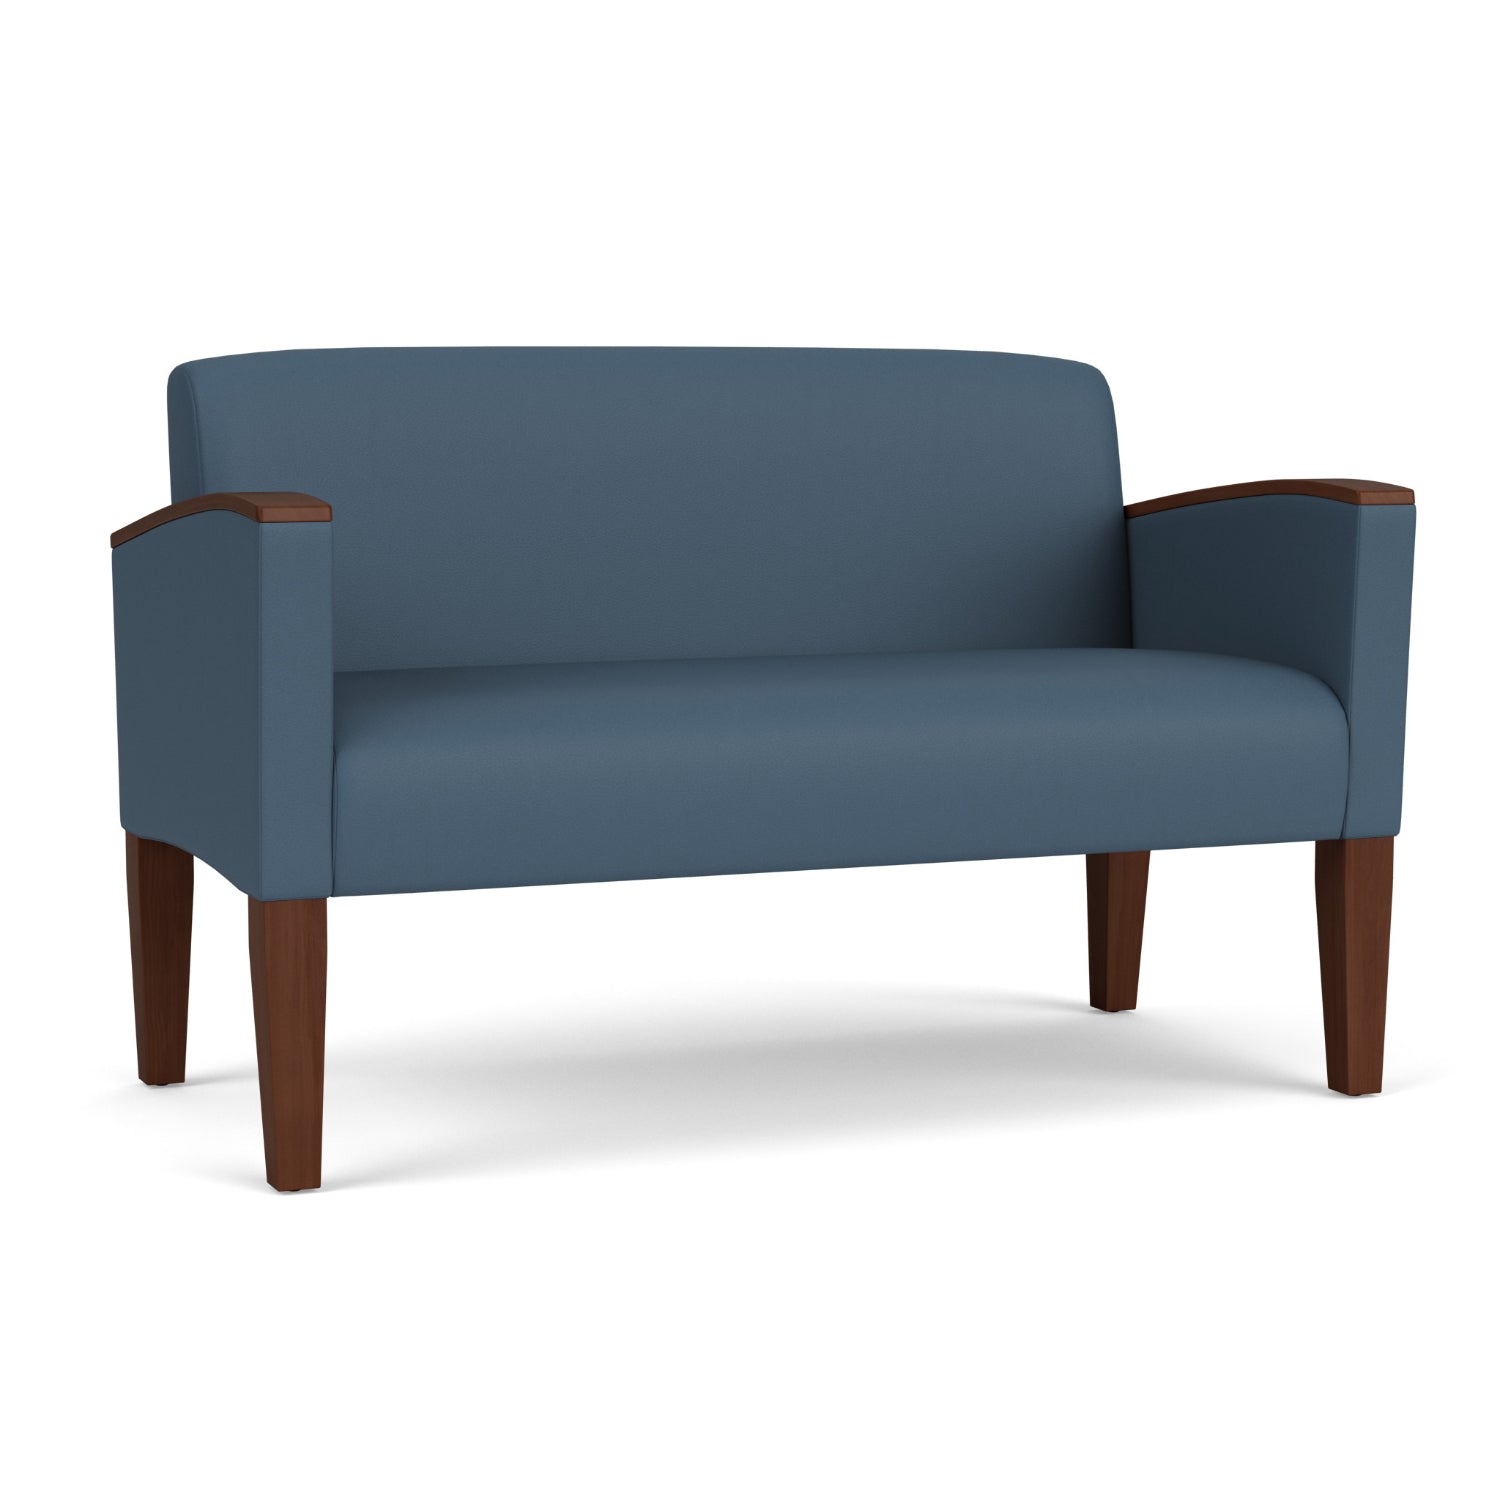 Belmont Collection Reception Seating, Loveseat, Standard Vinyl Upholstery, FREE SHIPPING